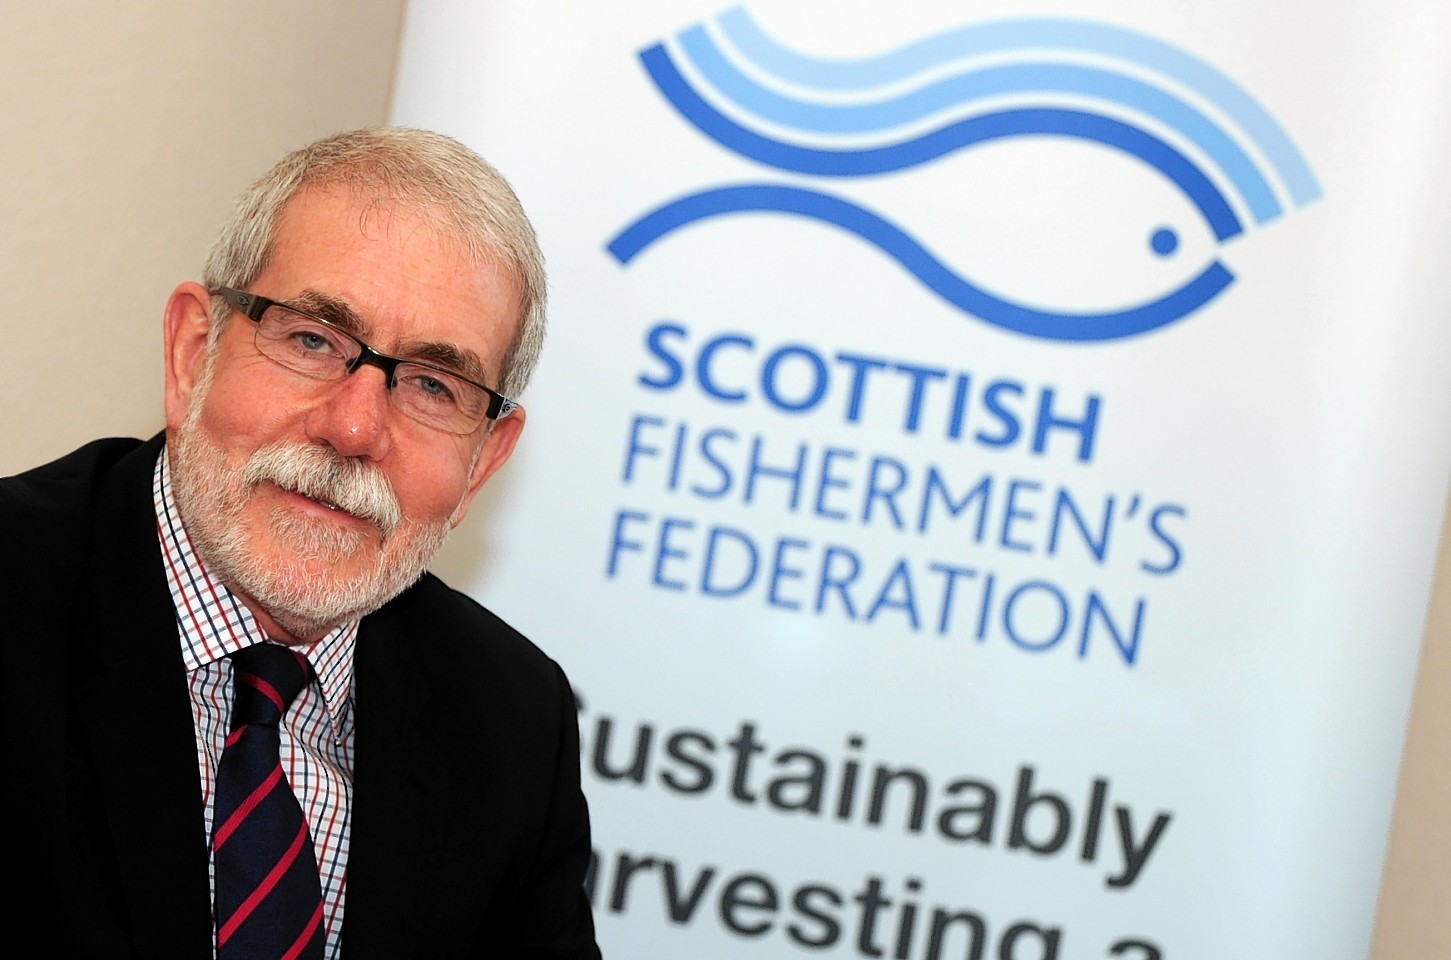 Scottish Fishermen's Federation chief executive Bertie Armstrong